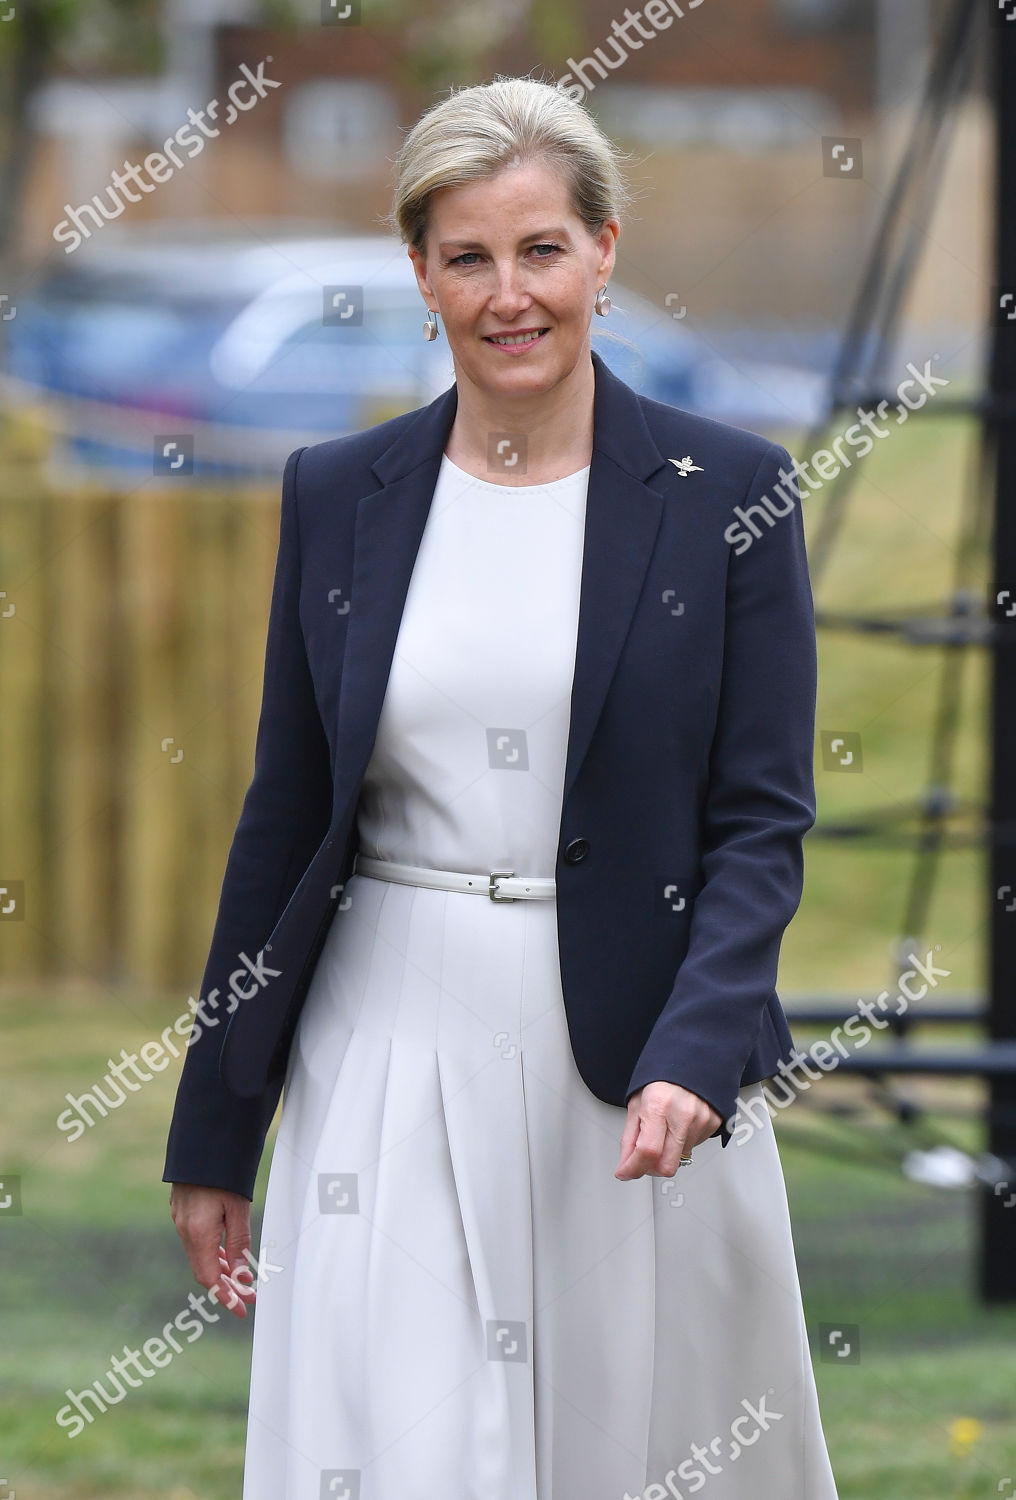 sophie-countess-of-wessex-opens-airplay-play-park-wittering-village-peterborough-uk-shutterstock-editorial-10217568j.jpg